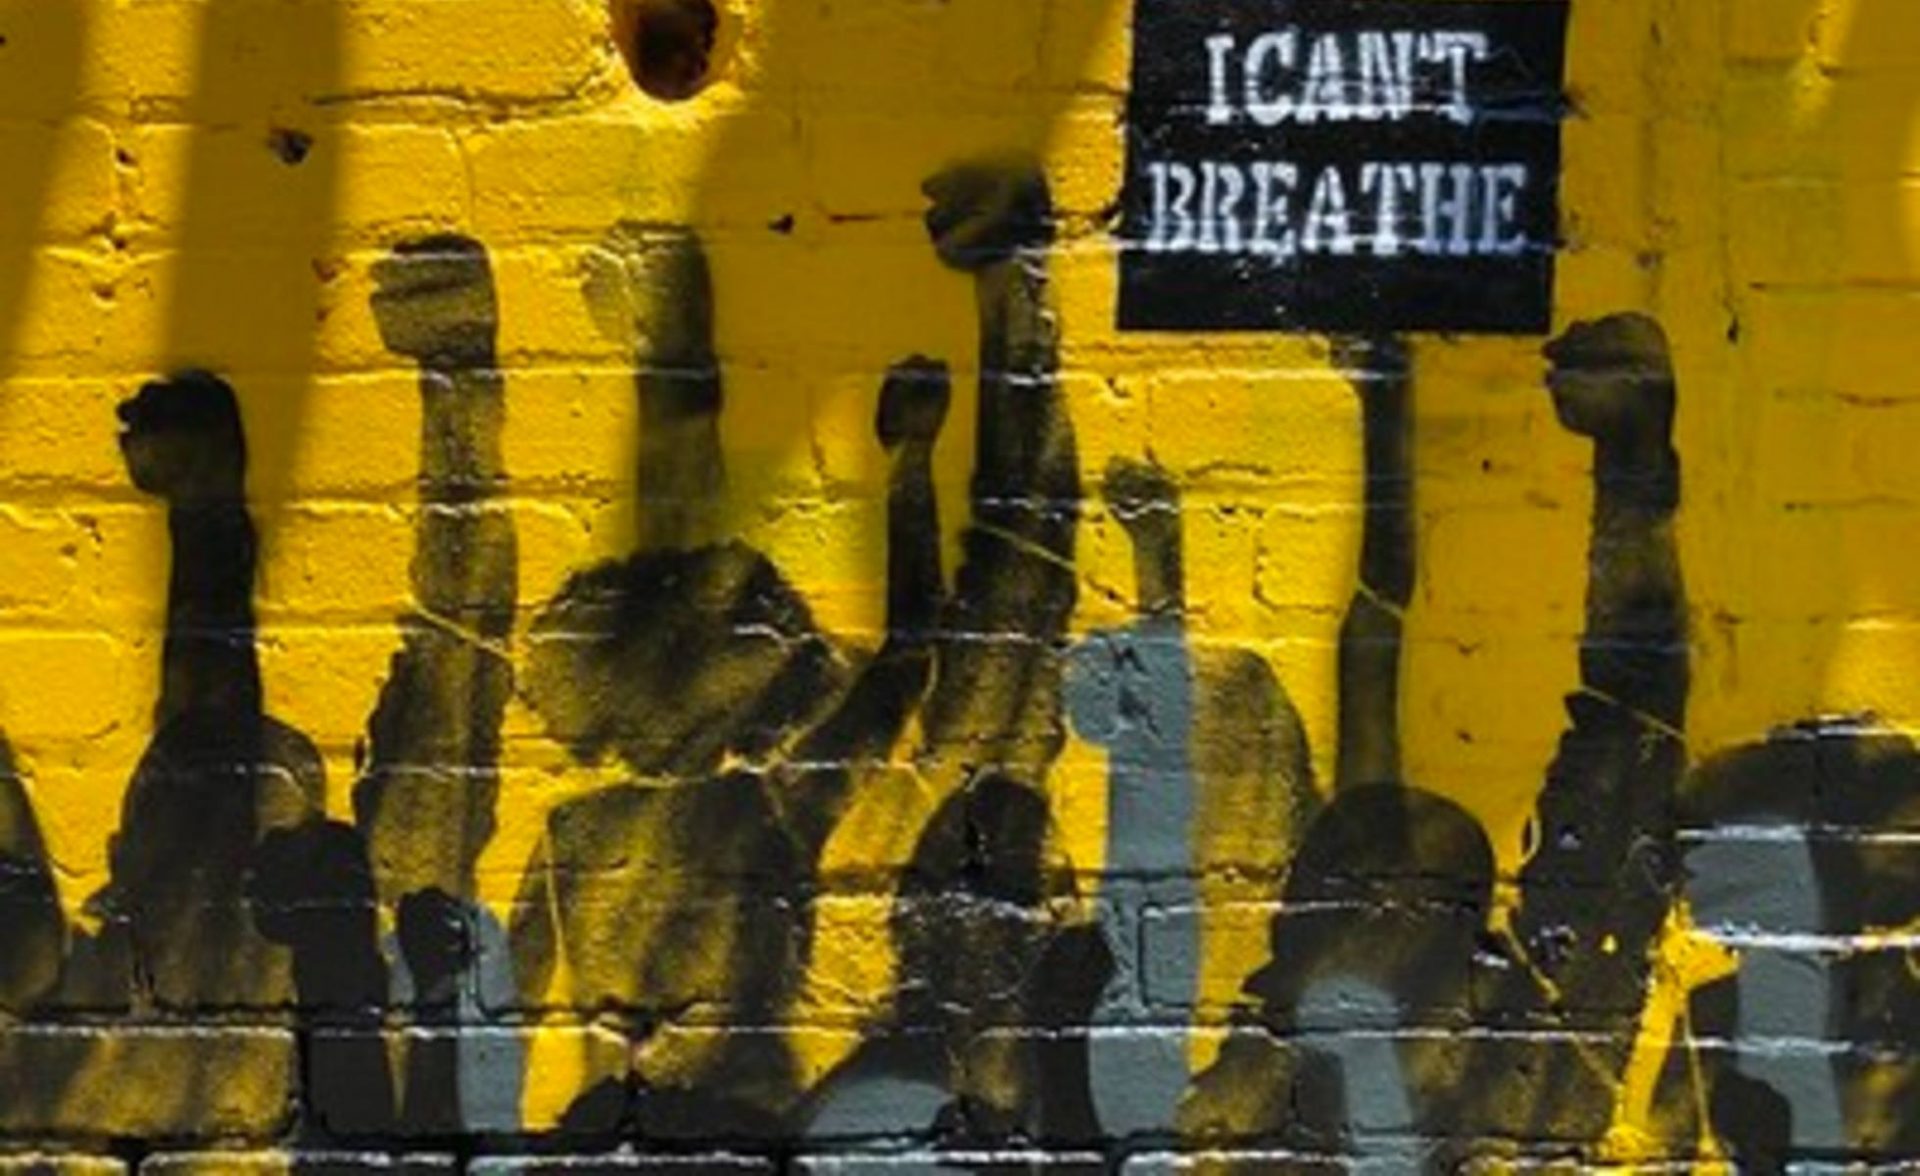 Mural of crowd with fists up holding I Can